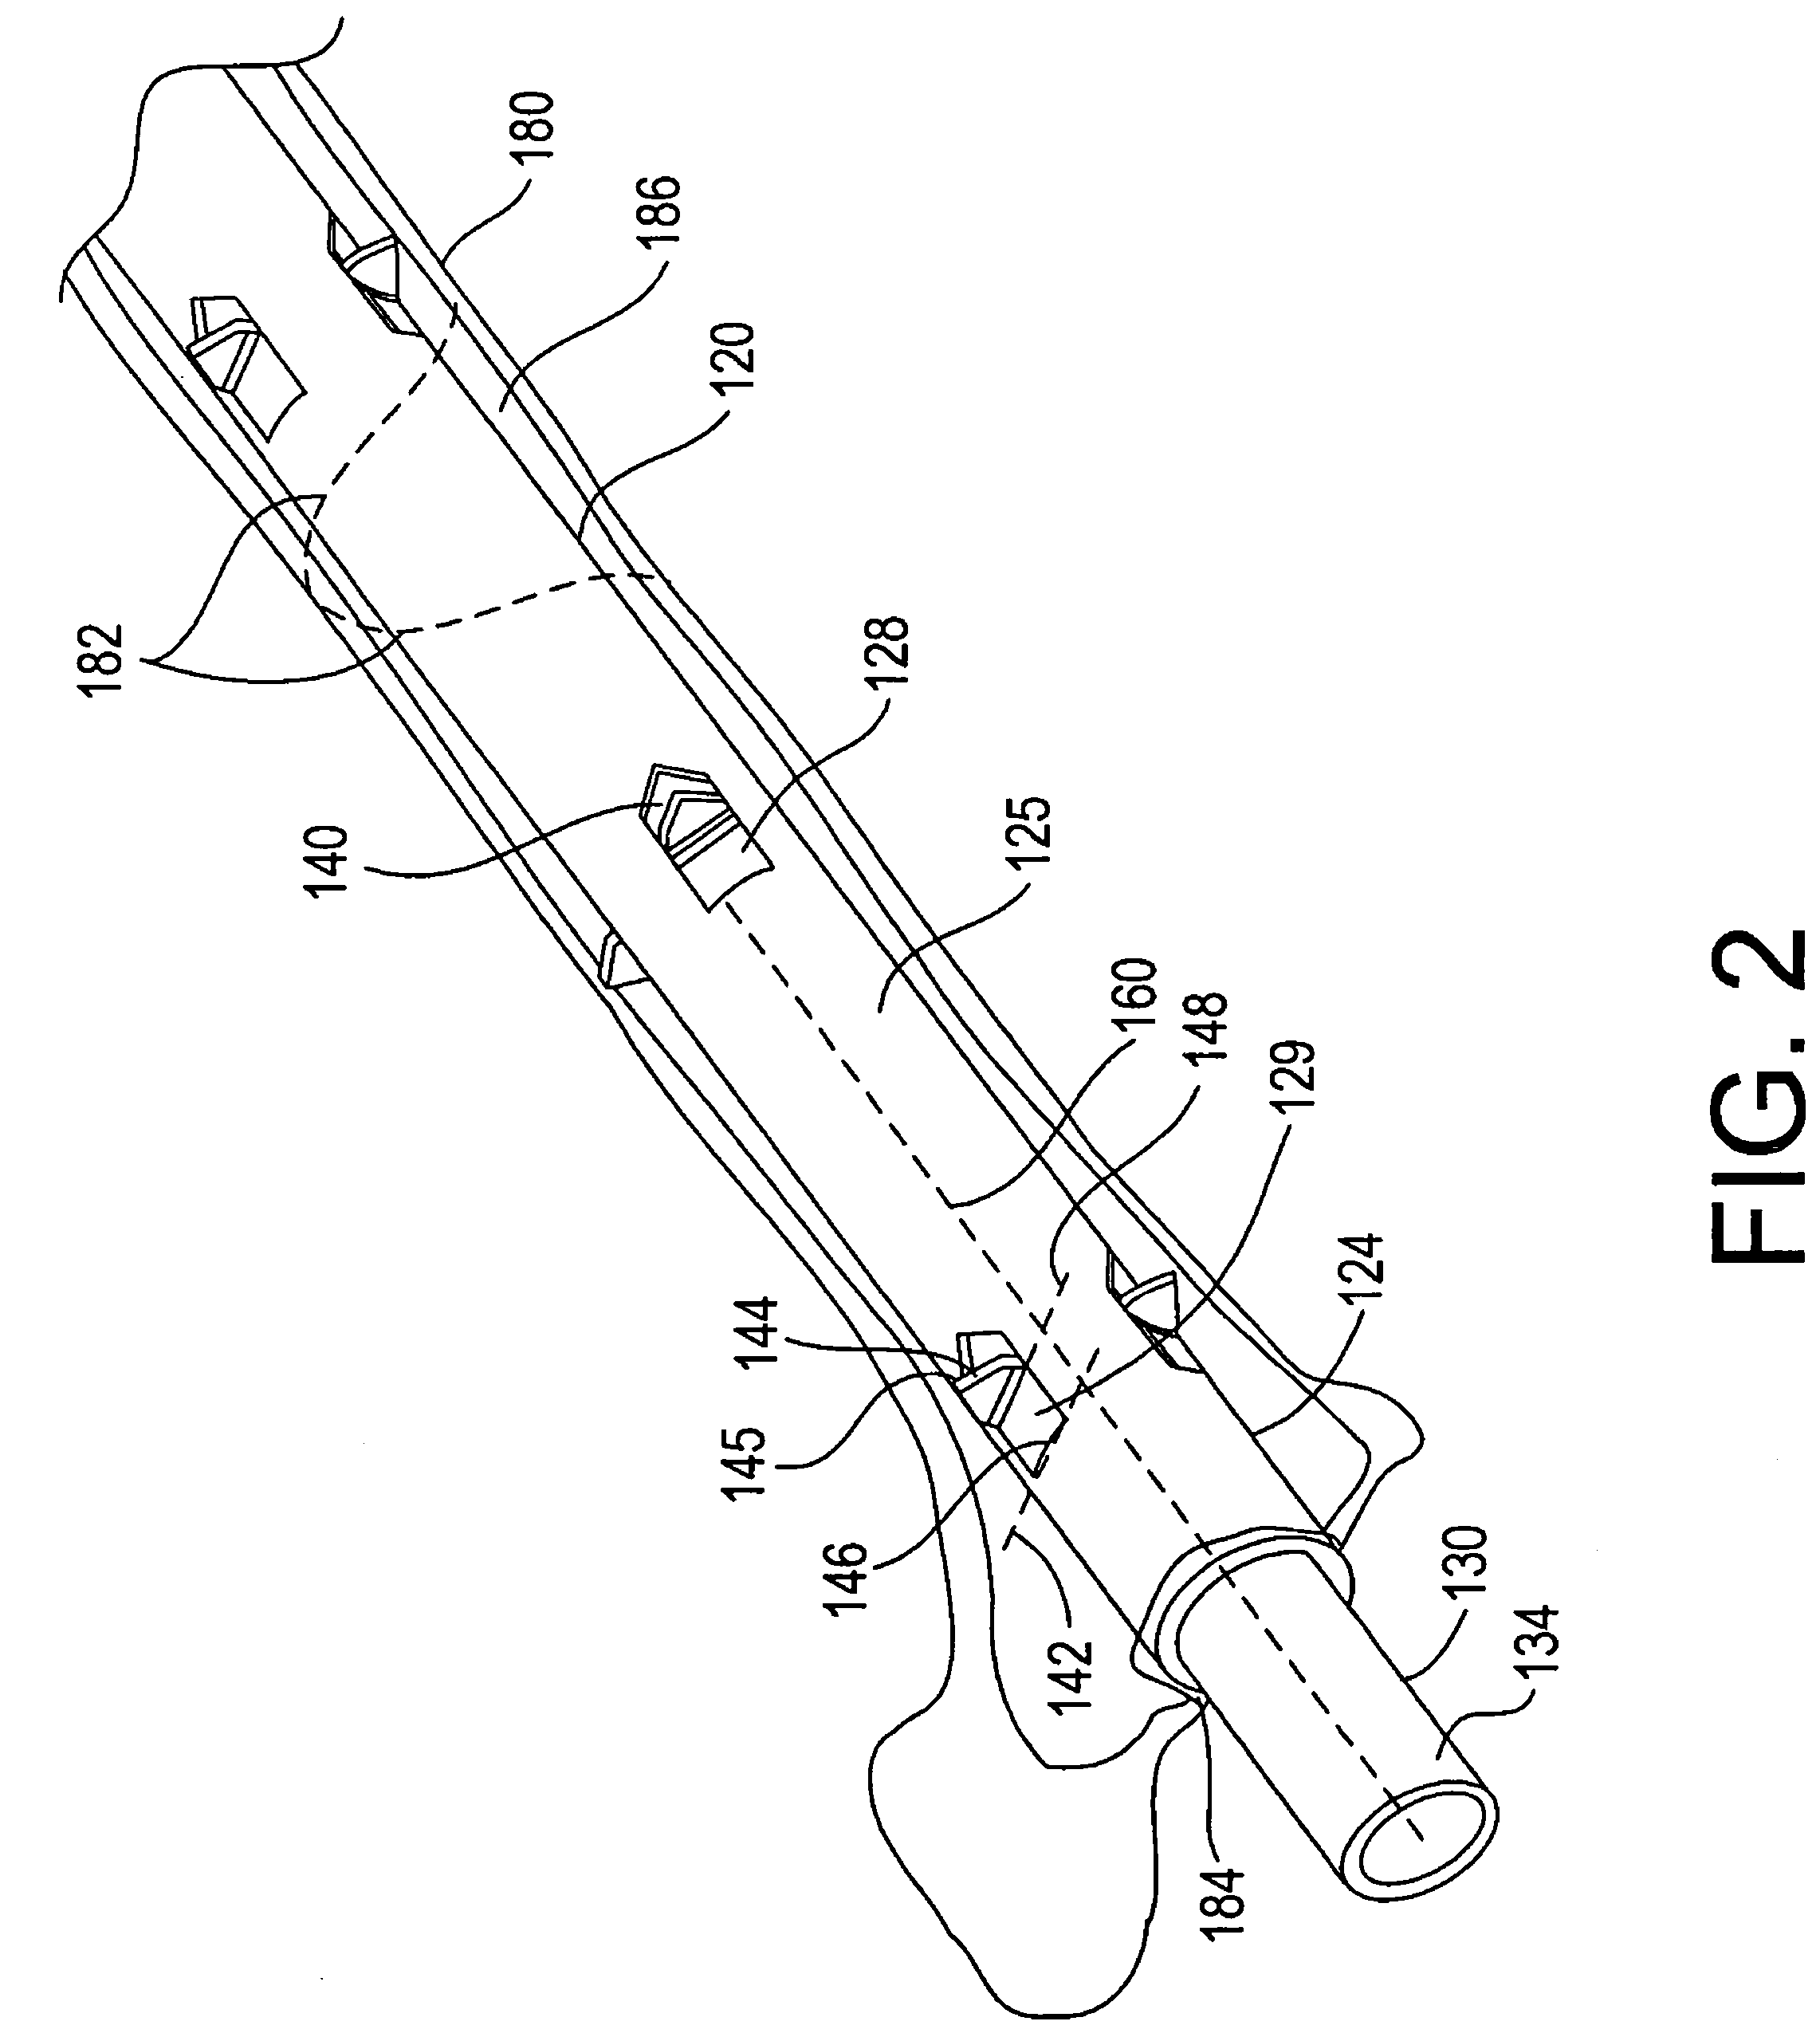 Bone fracture treatment devices and methods of their use